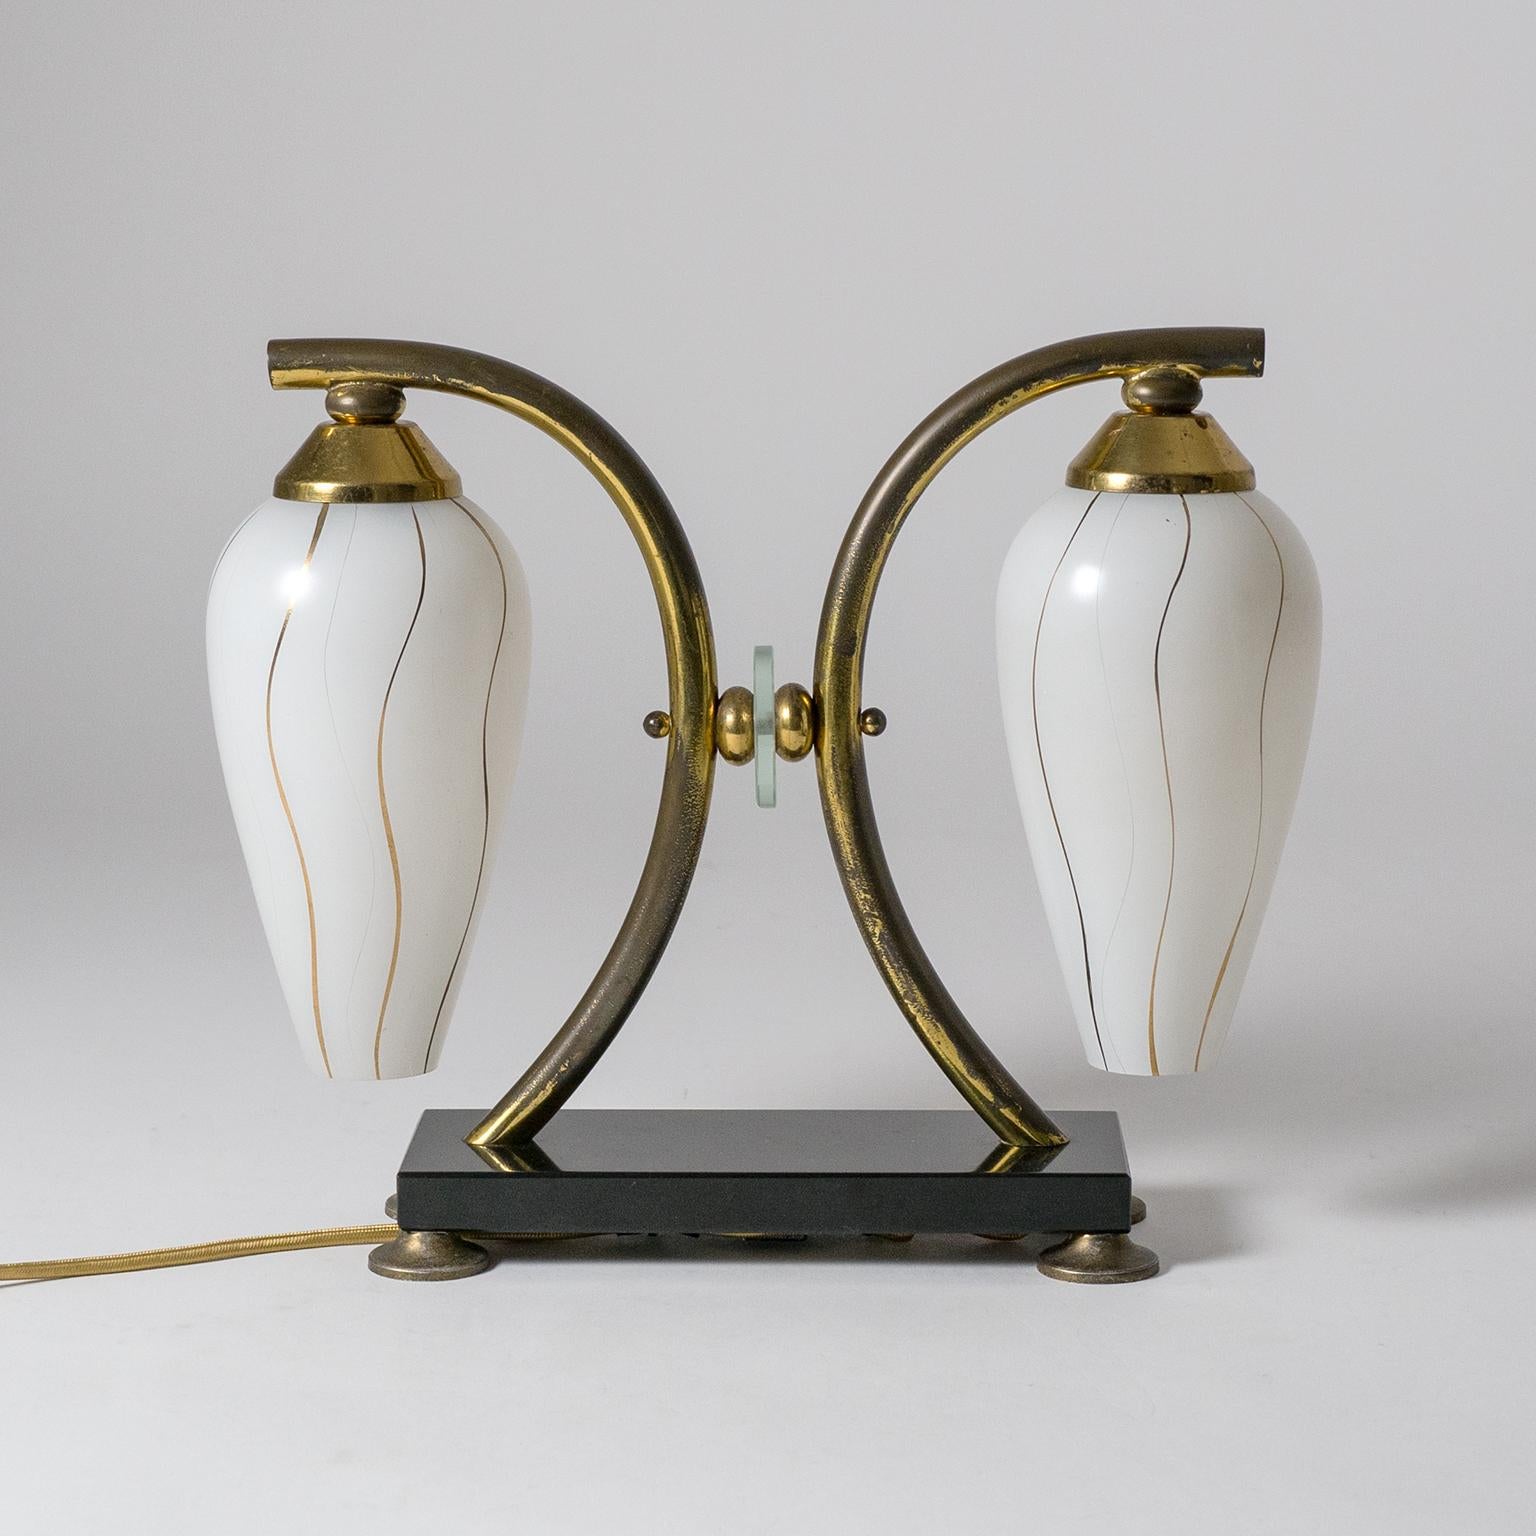 Rare pair of French midcentury table lamps with polished black stone base, brass arms and two enameled glass diffusers. The diffusers are enameled white on the outside with fine incisions and gold paint lines. Fine original condition with a fair